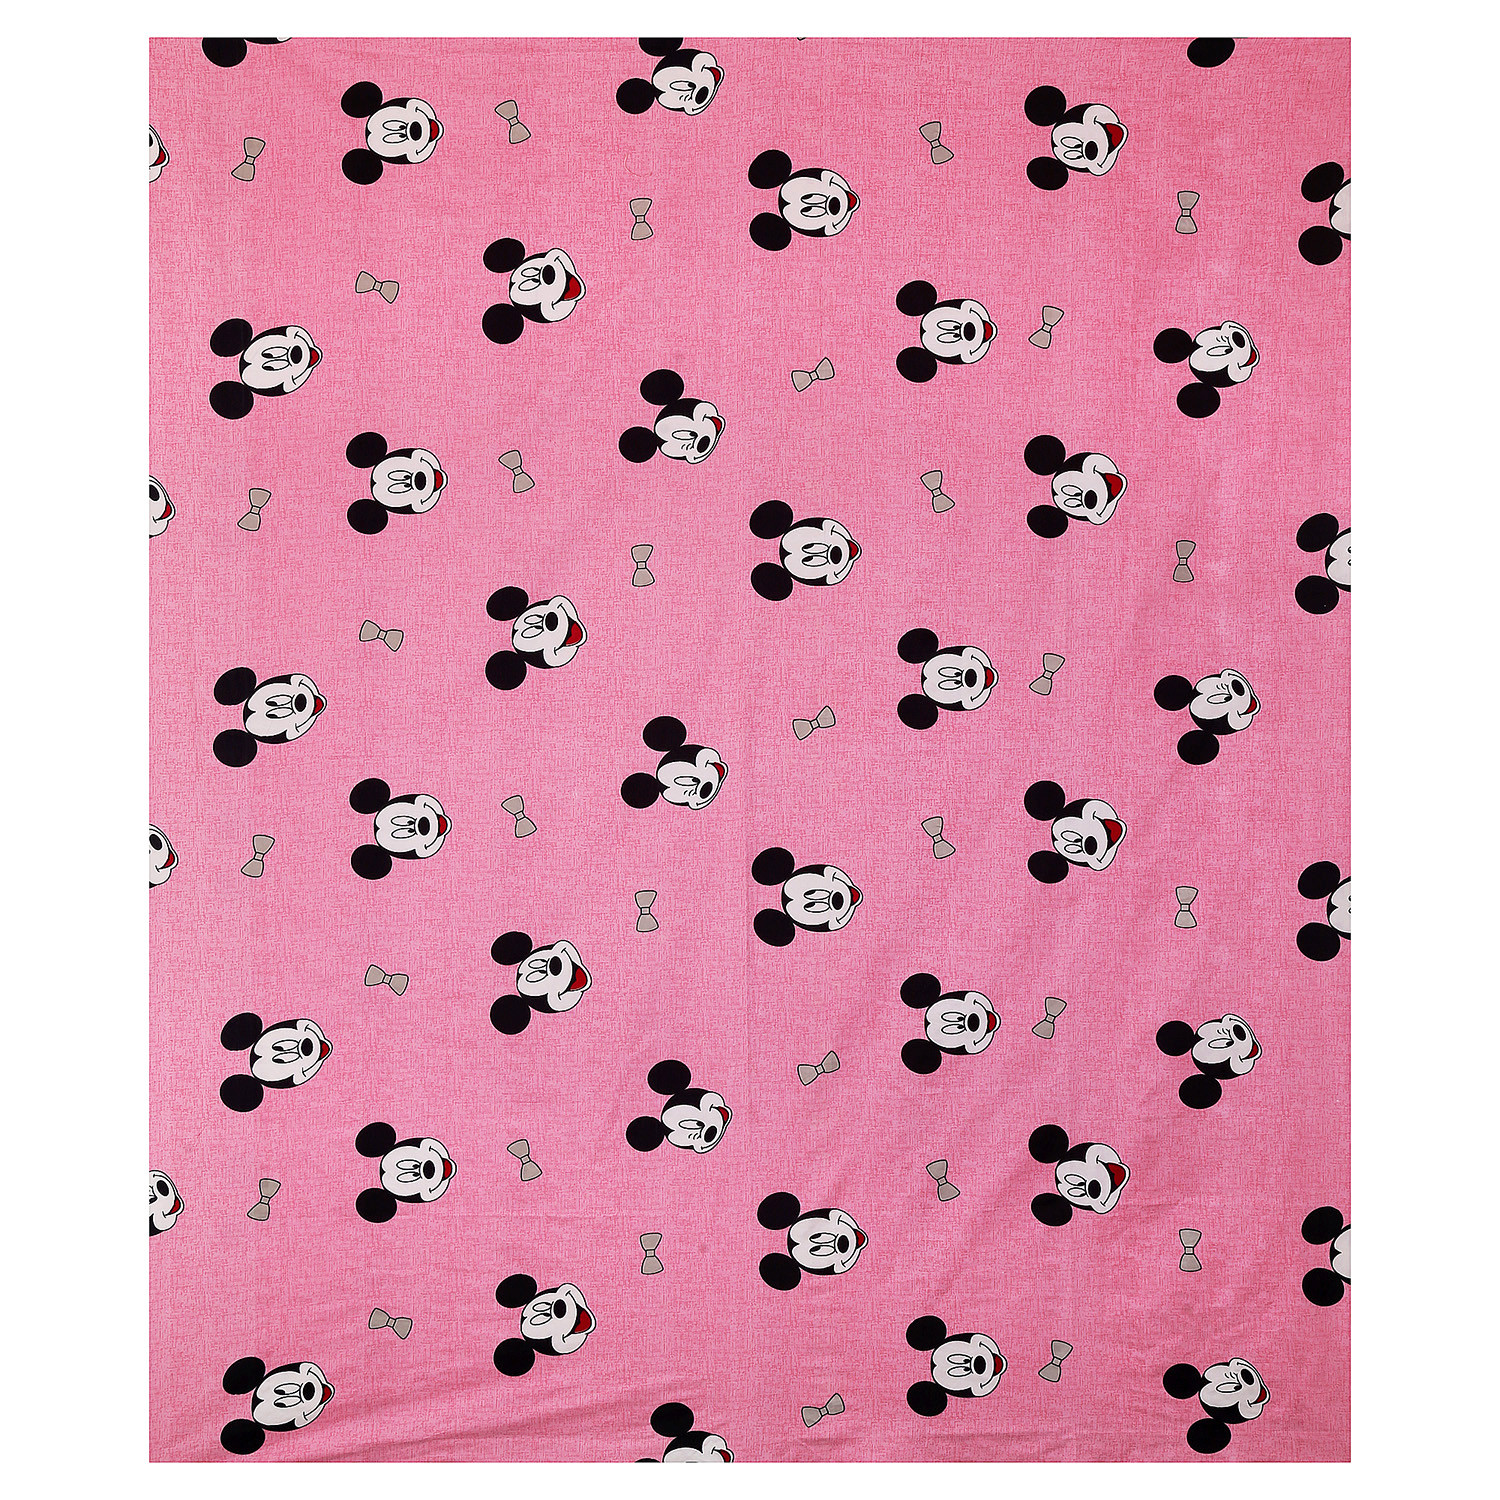 Kuber Industries Glace Cotton Disney Mickey Mouse Face Printed Double Bedsheet With 2 Pillow Covers,90x100,(Pink)